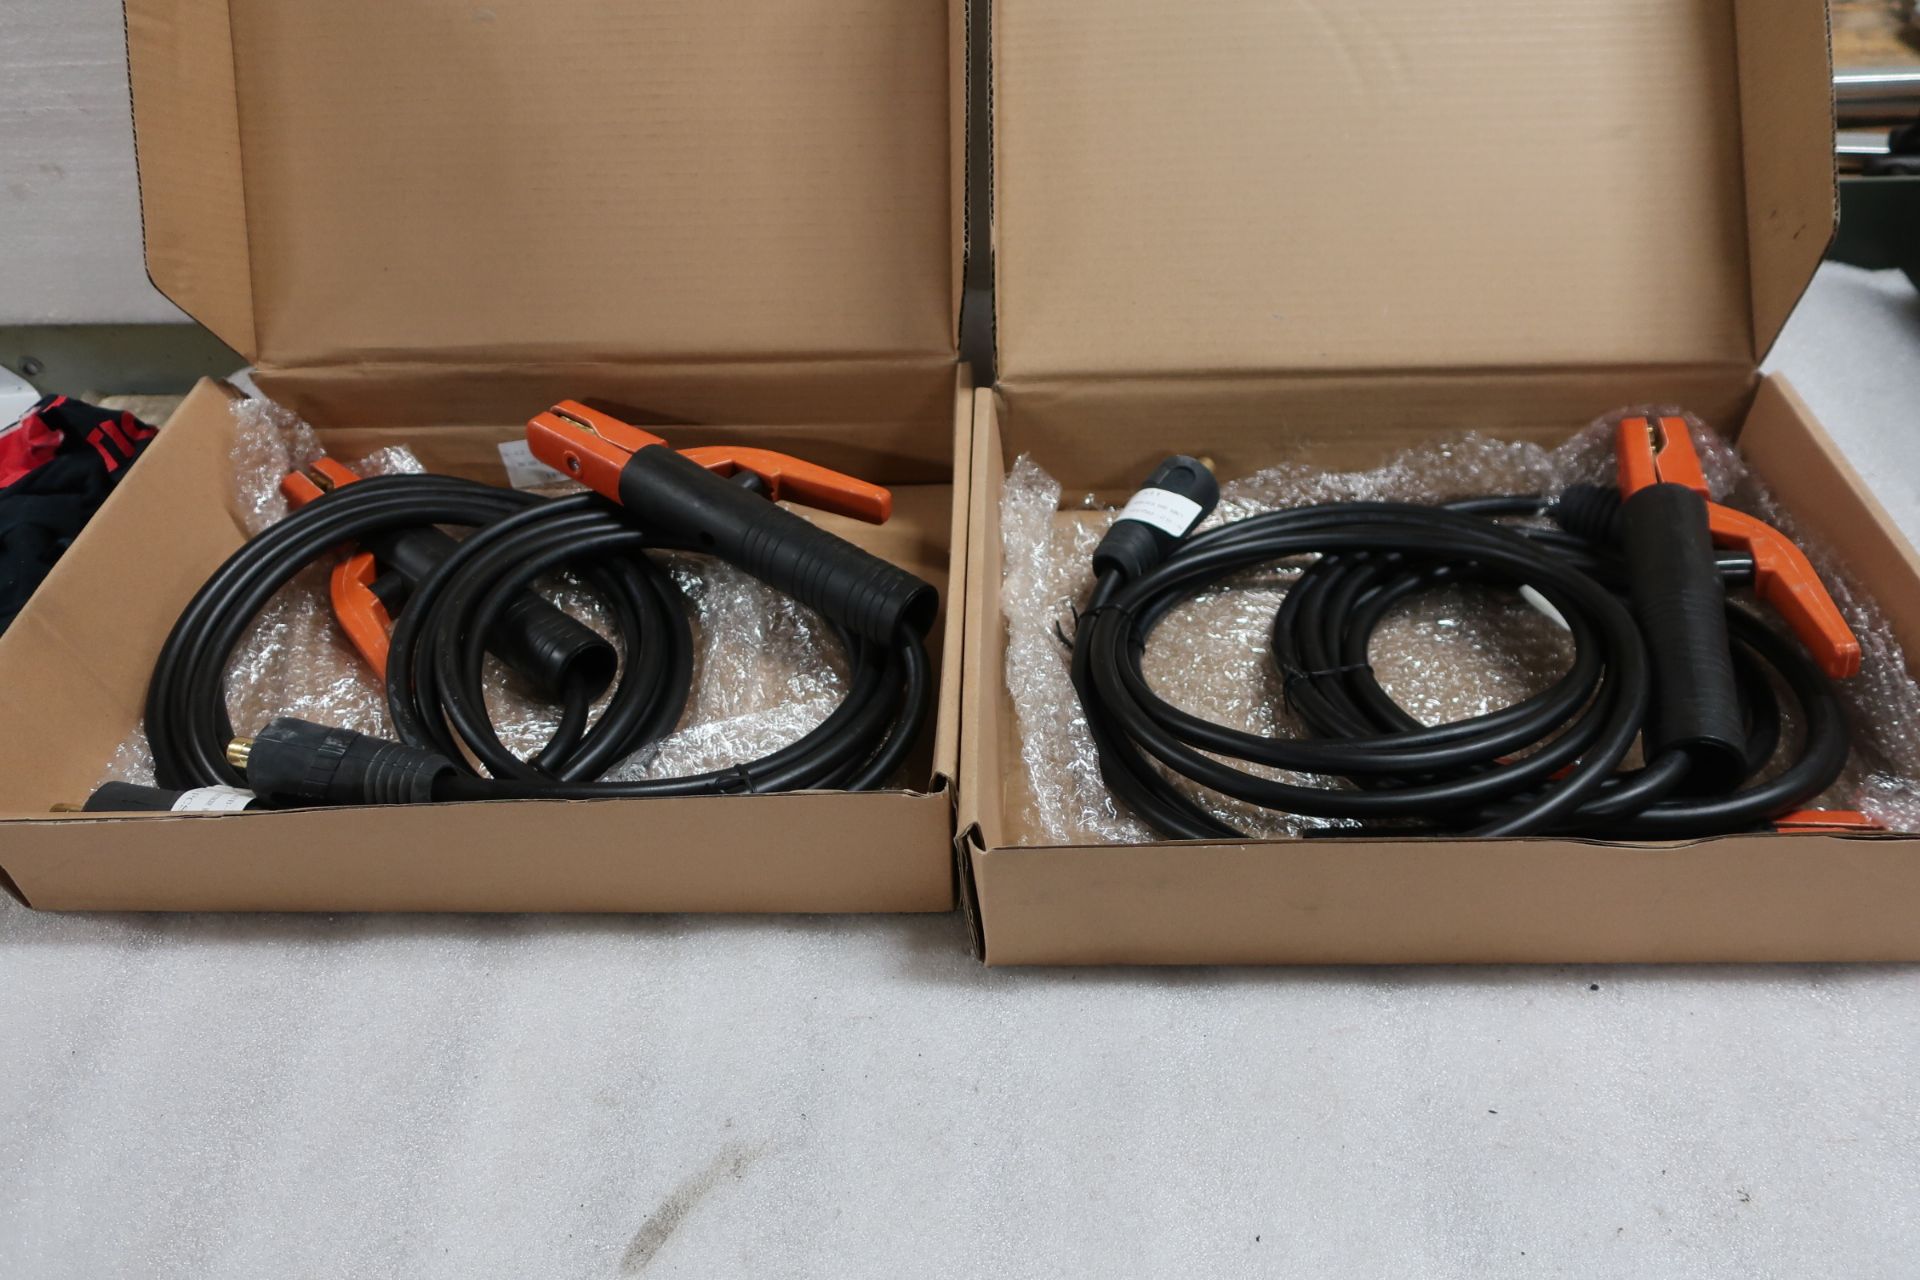 Lot of 2 (2 units) Brand new Welding Electrodes cables